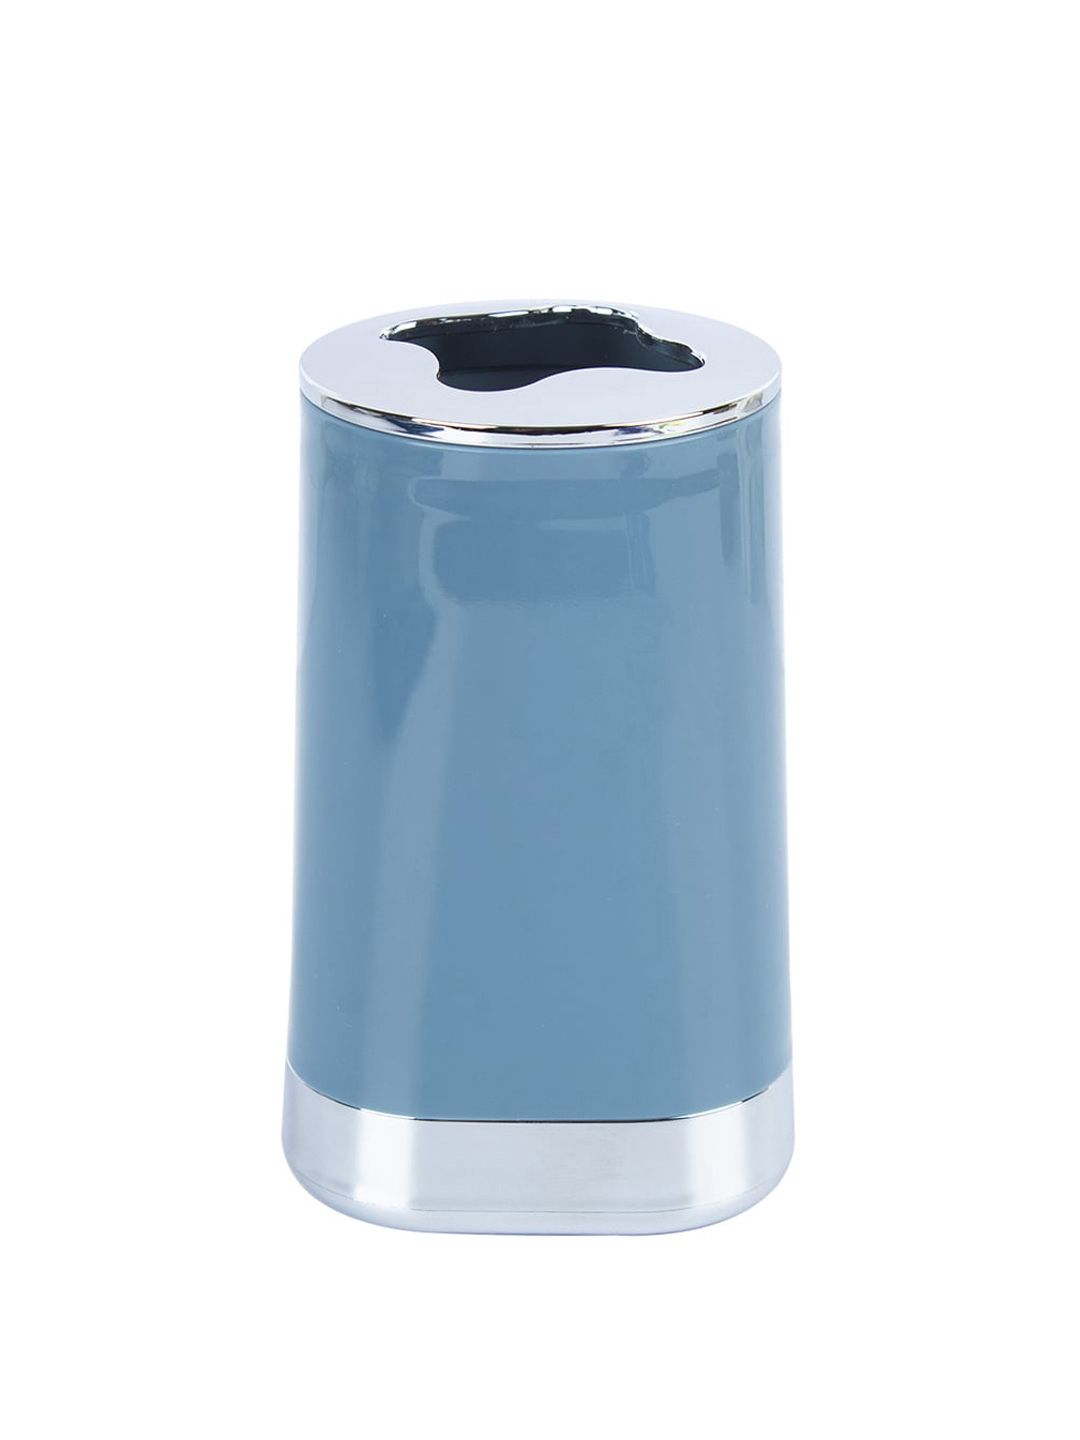 MARKET99 Blue & Silver-Toned Plastic Toothbrush Holder Price in India